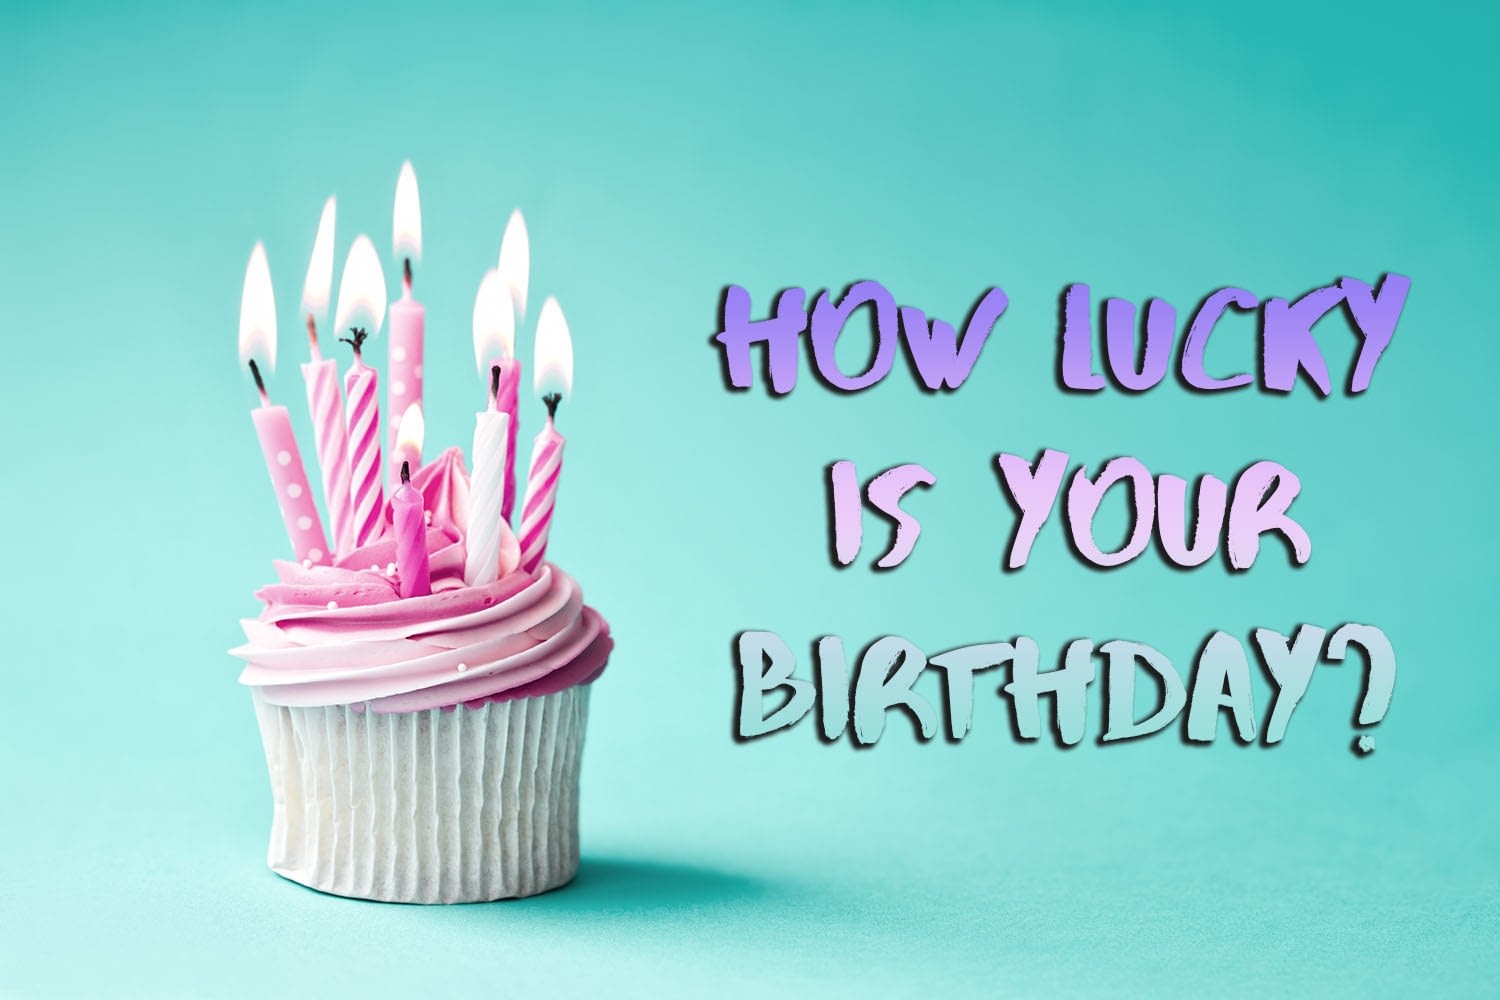 2021 Lucky Birthday Rankings! Just how lucky is your birthday?